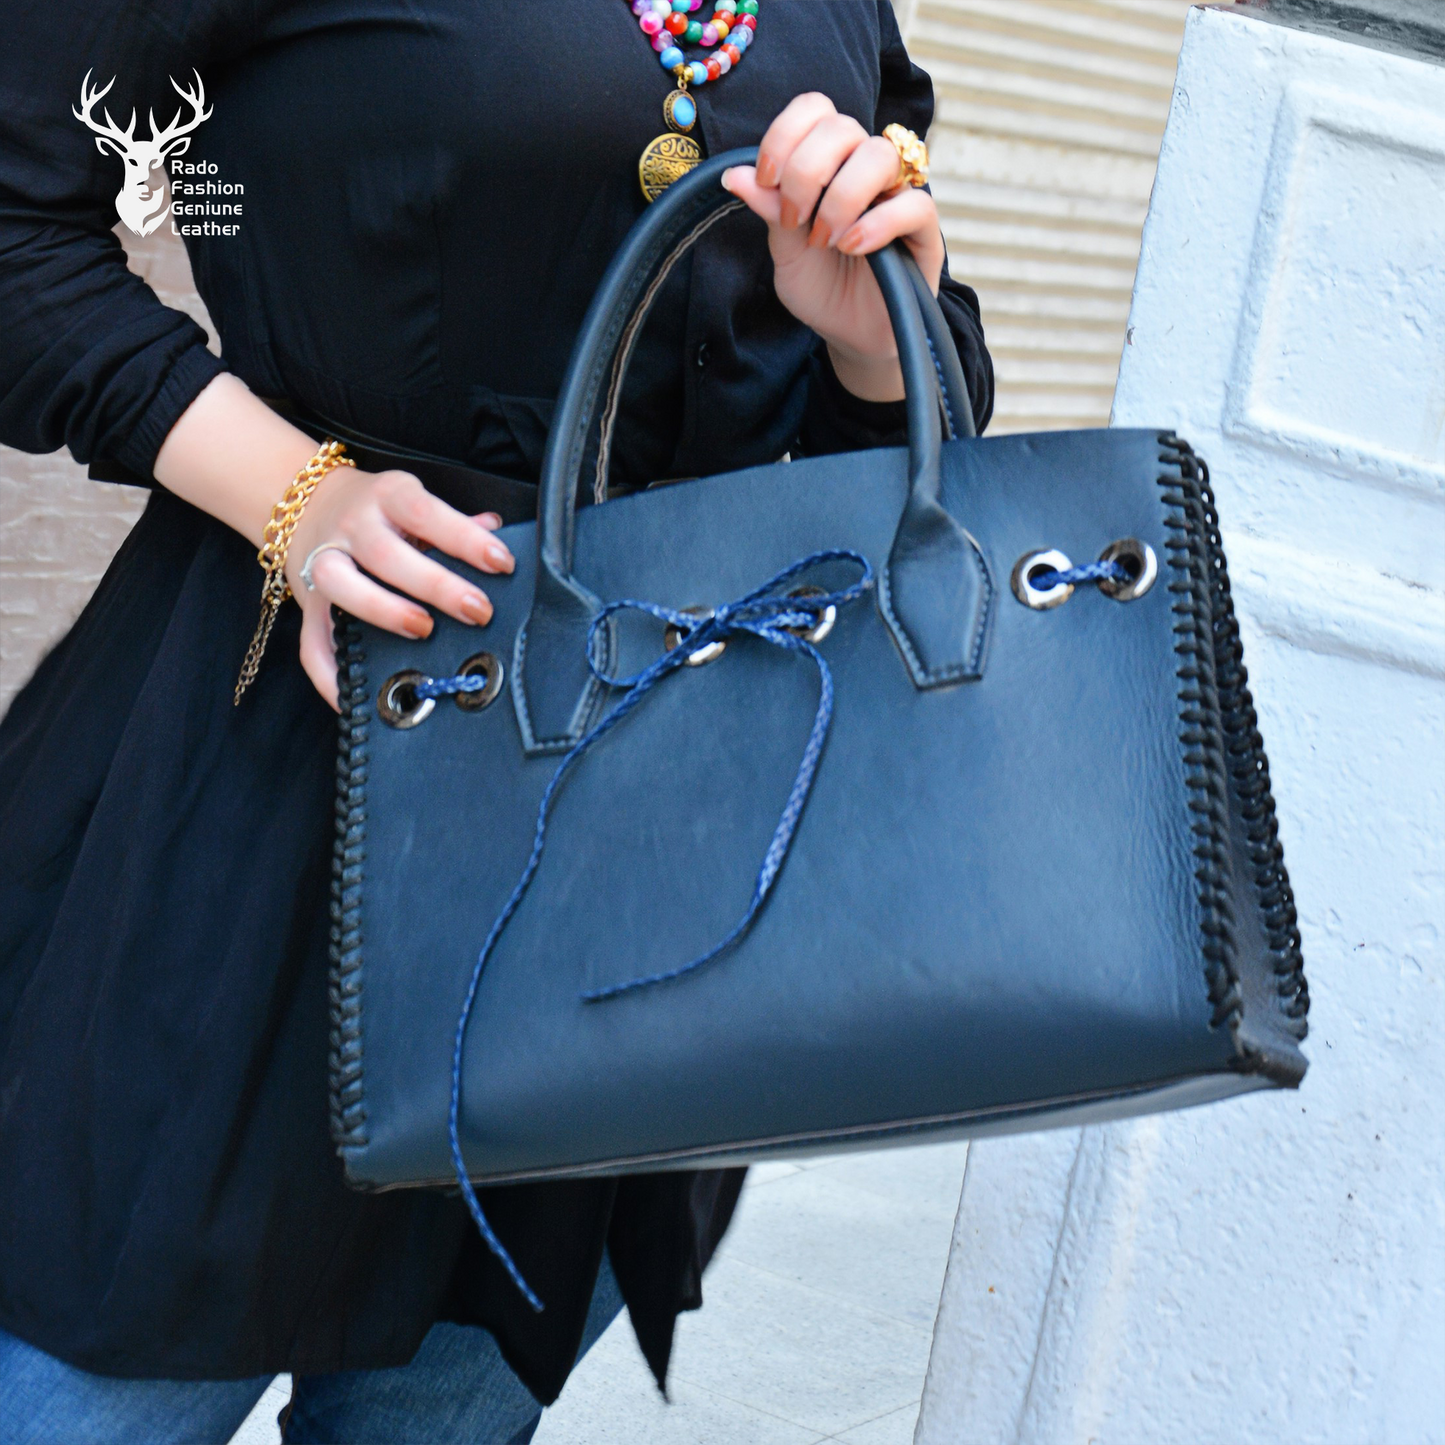 Bow tied deep blue bag with laced stitches